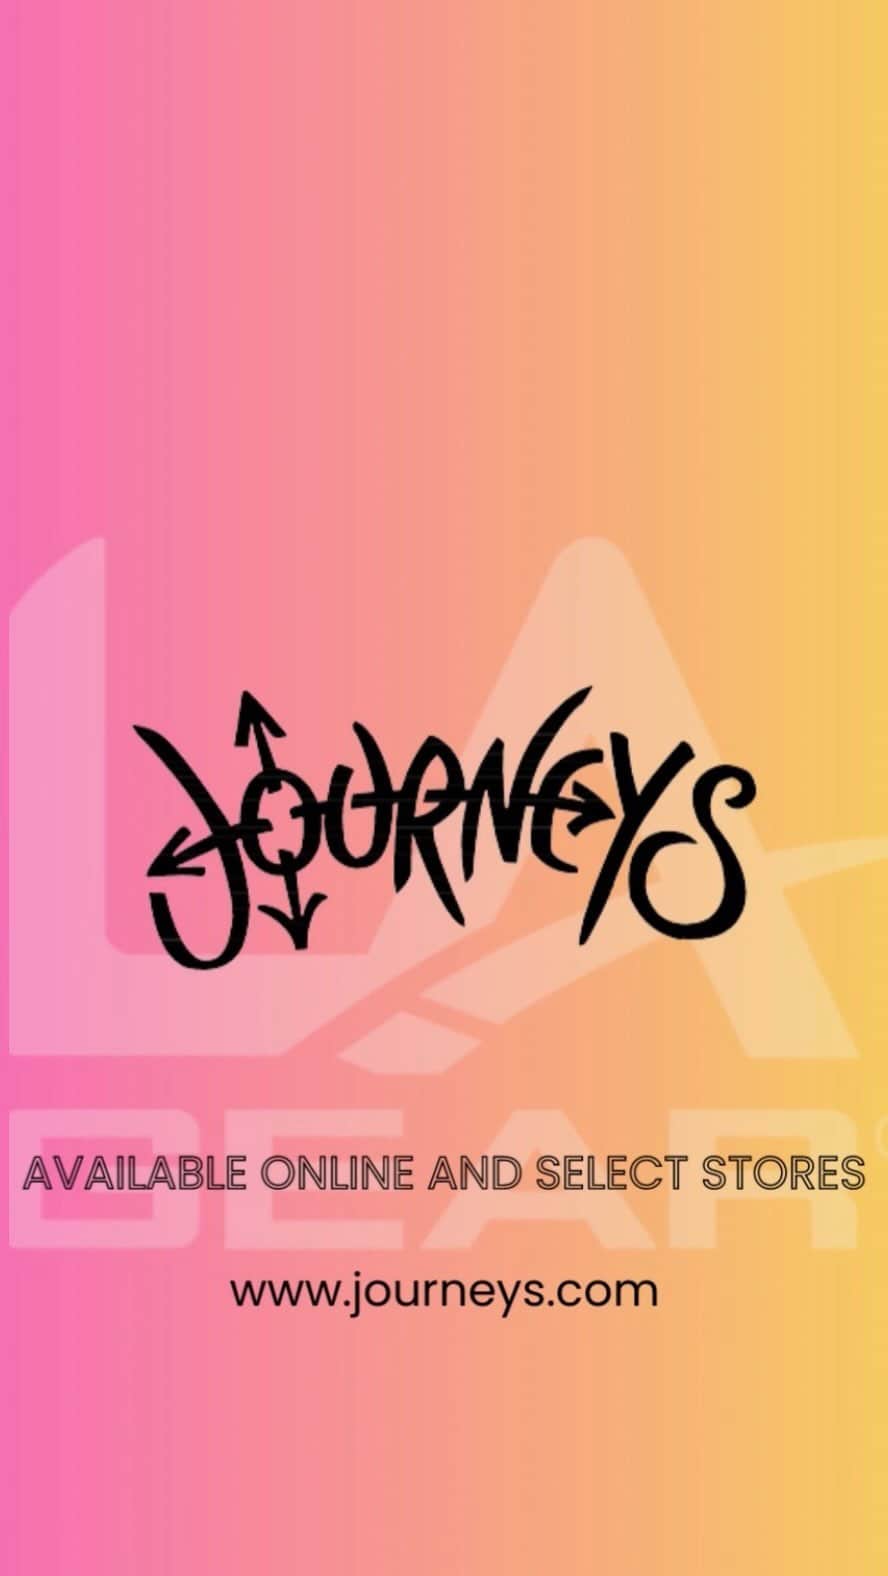 LAギアのインスタグラム：「LA Gear x Journeys Kidz • Now available at www.journeys.com and select Journeys stores #LAGear #LAGearStyle #Journeys #JourneysKidz #Sneakers #Kidsshoe #Youthshoes #Flames」